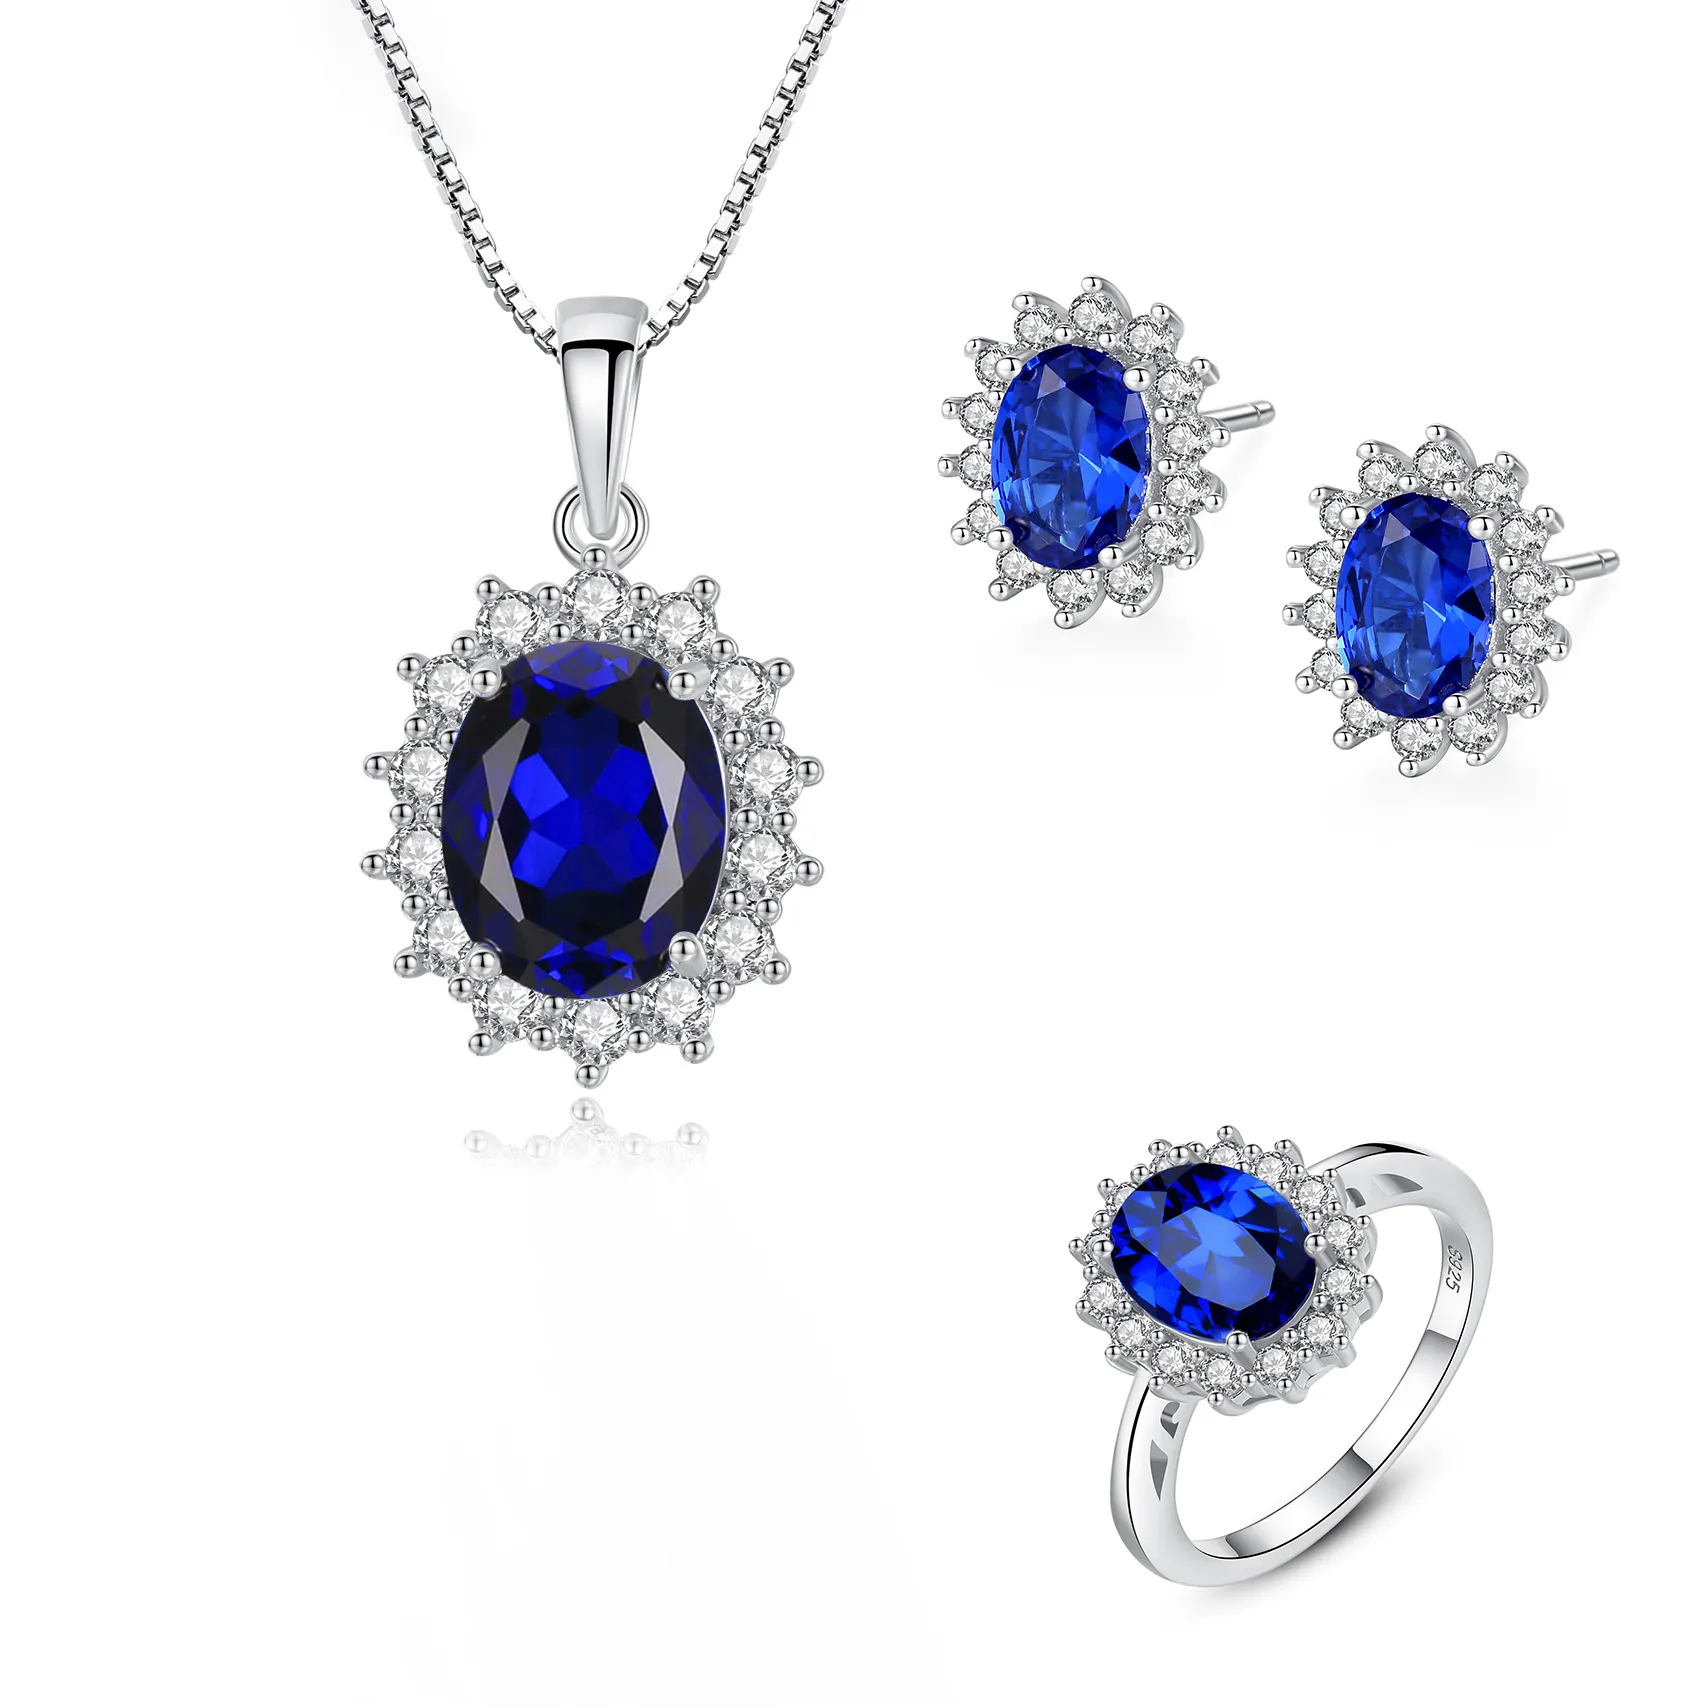 Hot Sale 925 Sterling Silver Luxury Shiny Colorful Jewelry Set